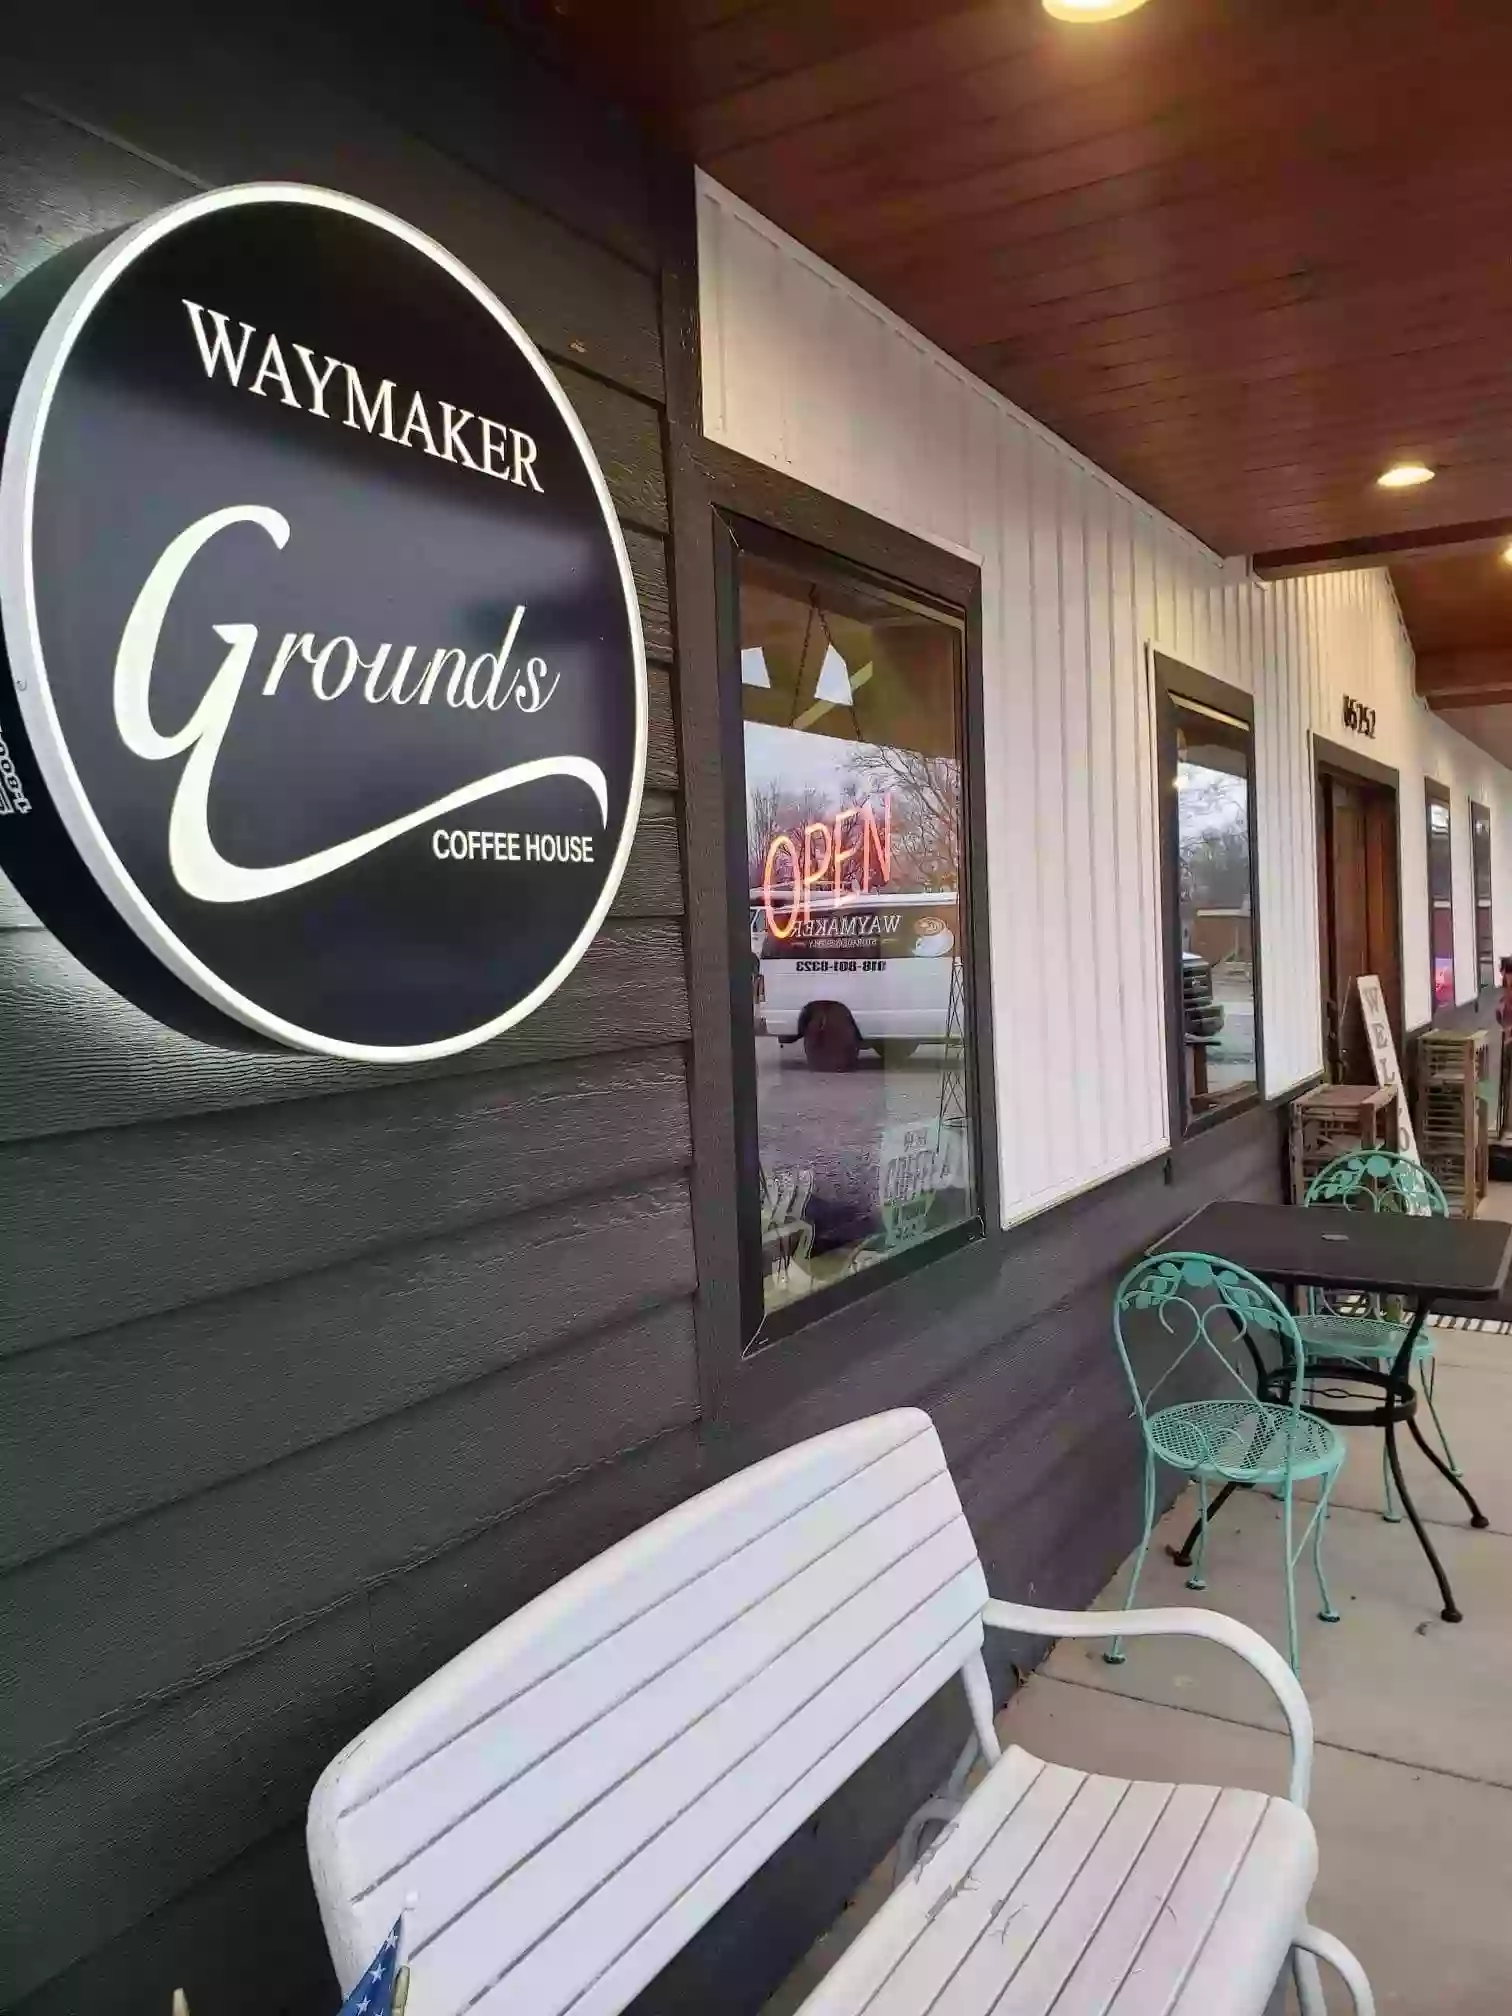 Waymaker Grounds Coffee House